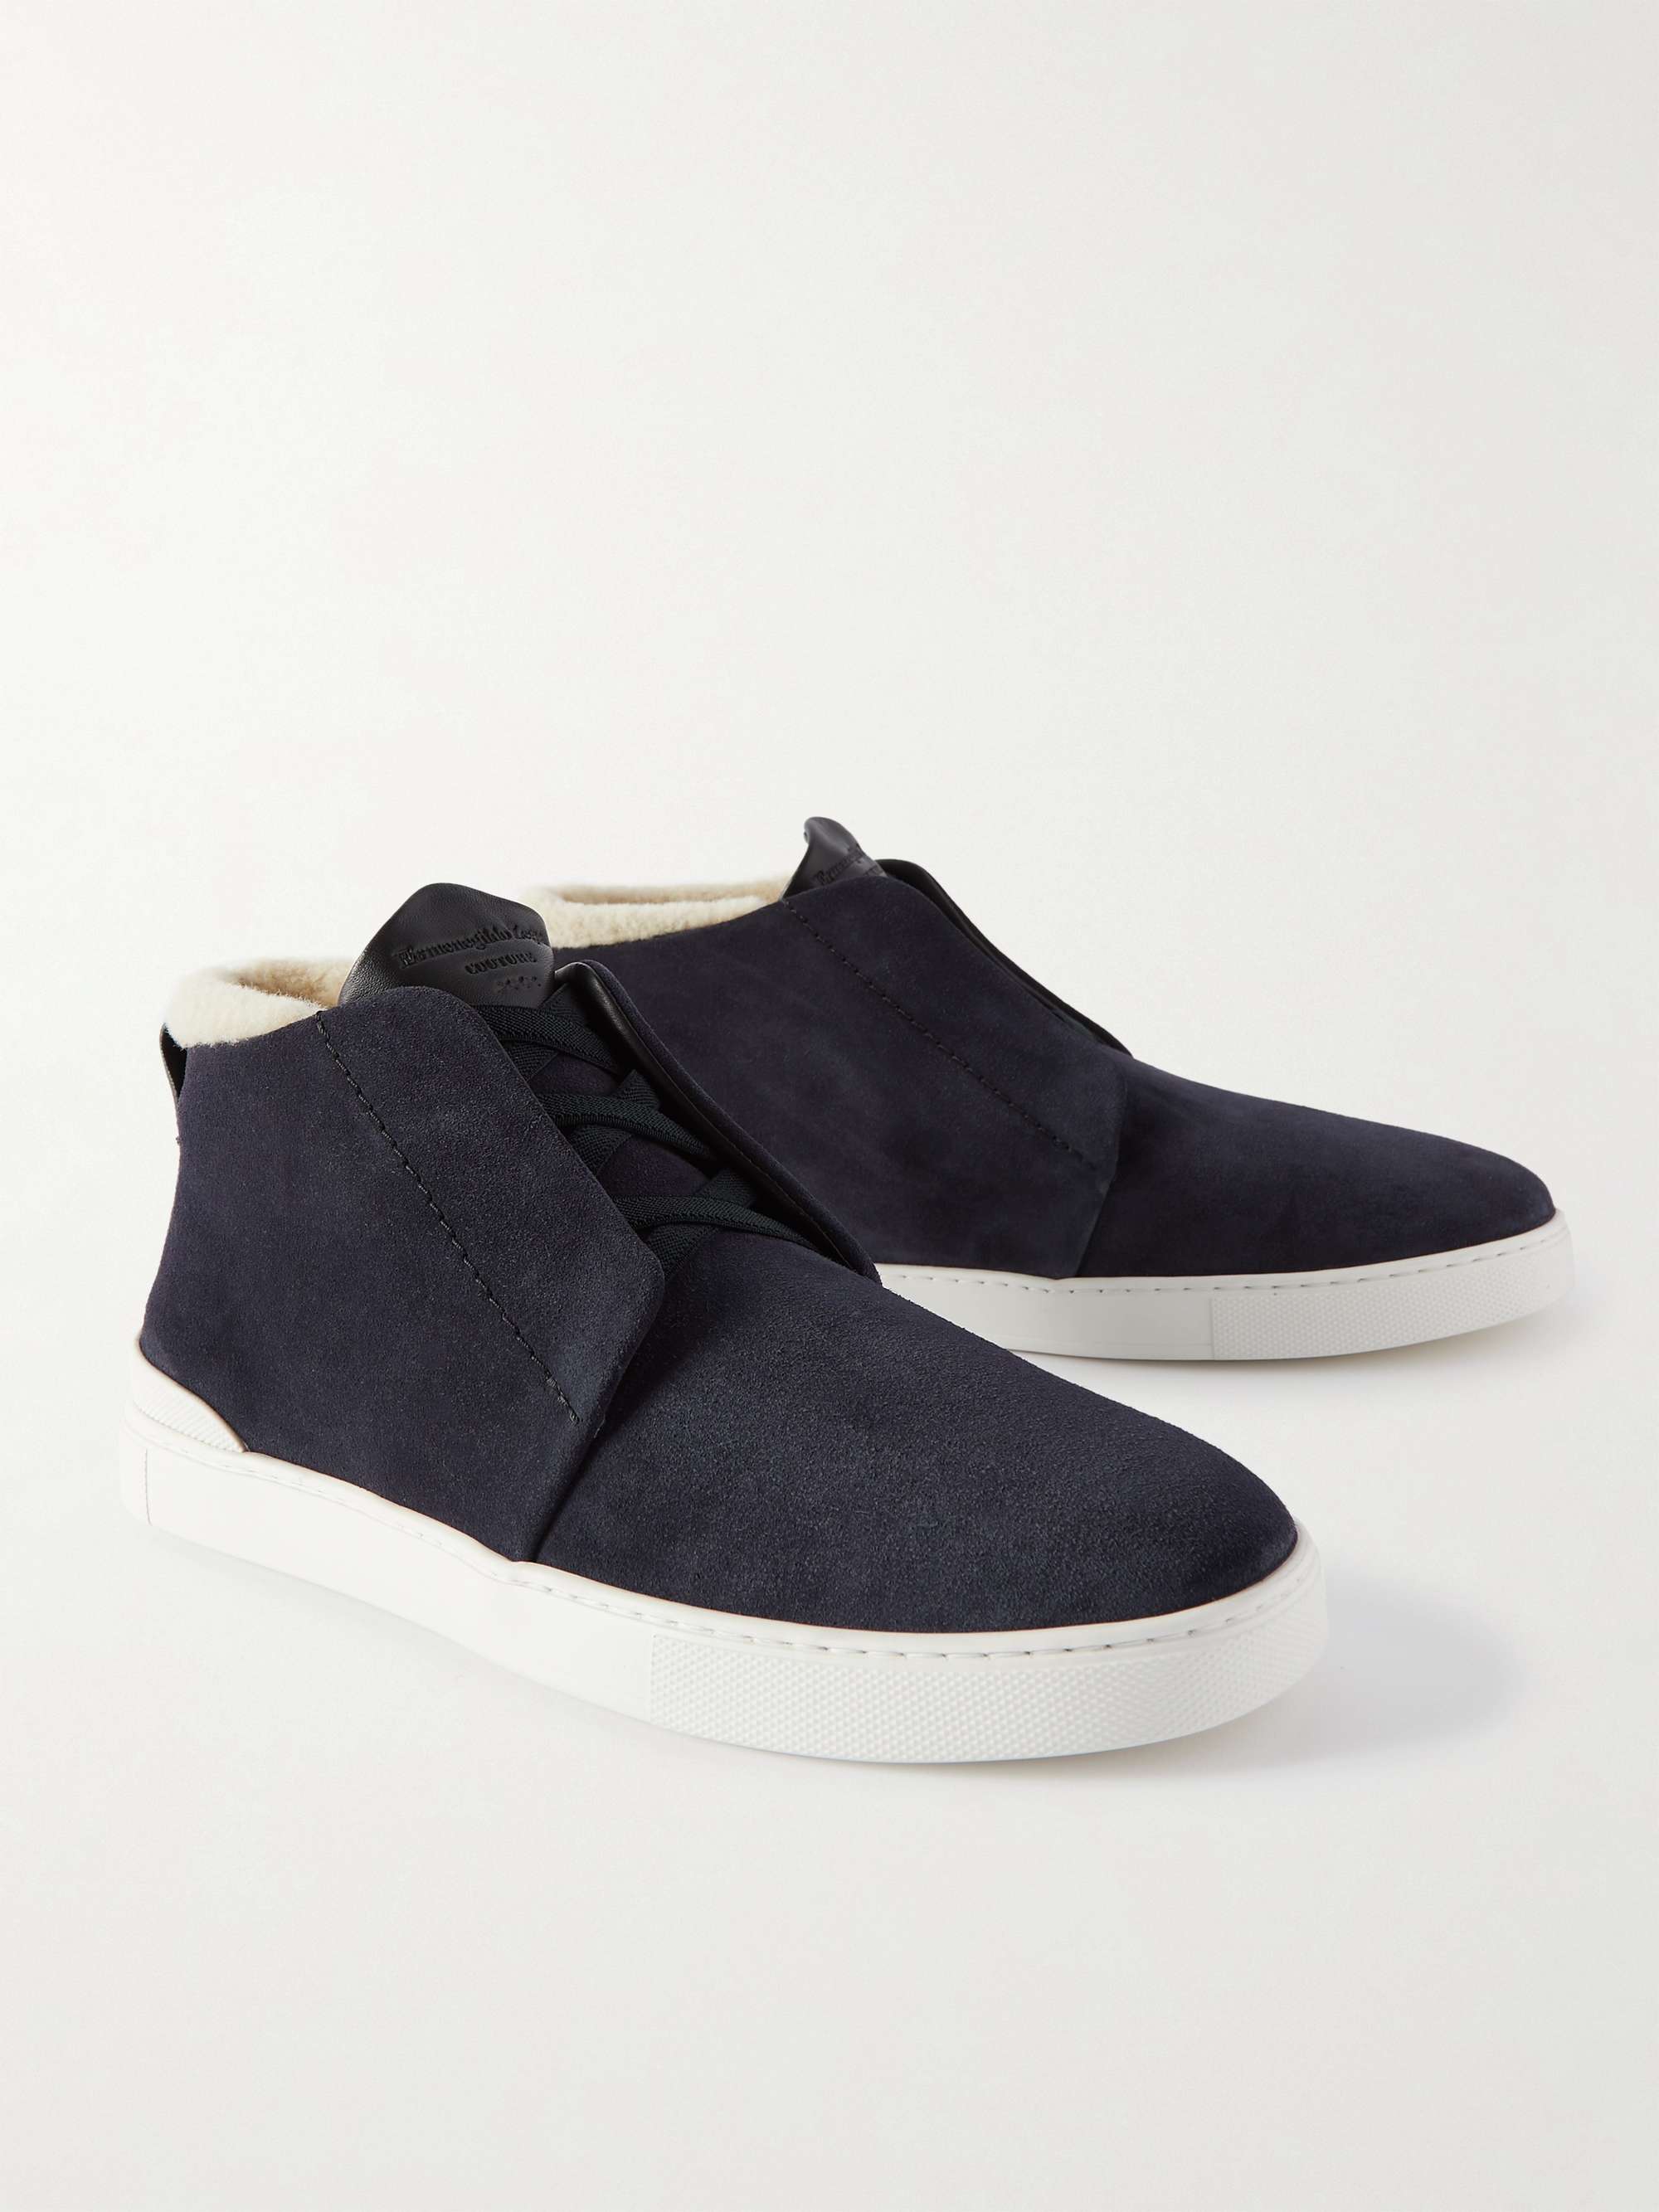 ERMENEGILDO ZEGNA #UseTheExisting Triple Stitch Mid Top Wool-Lined Suede Sneakers